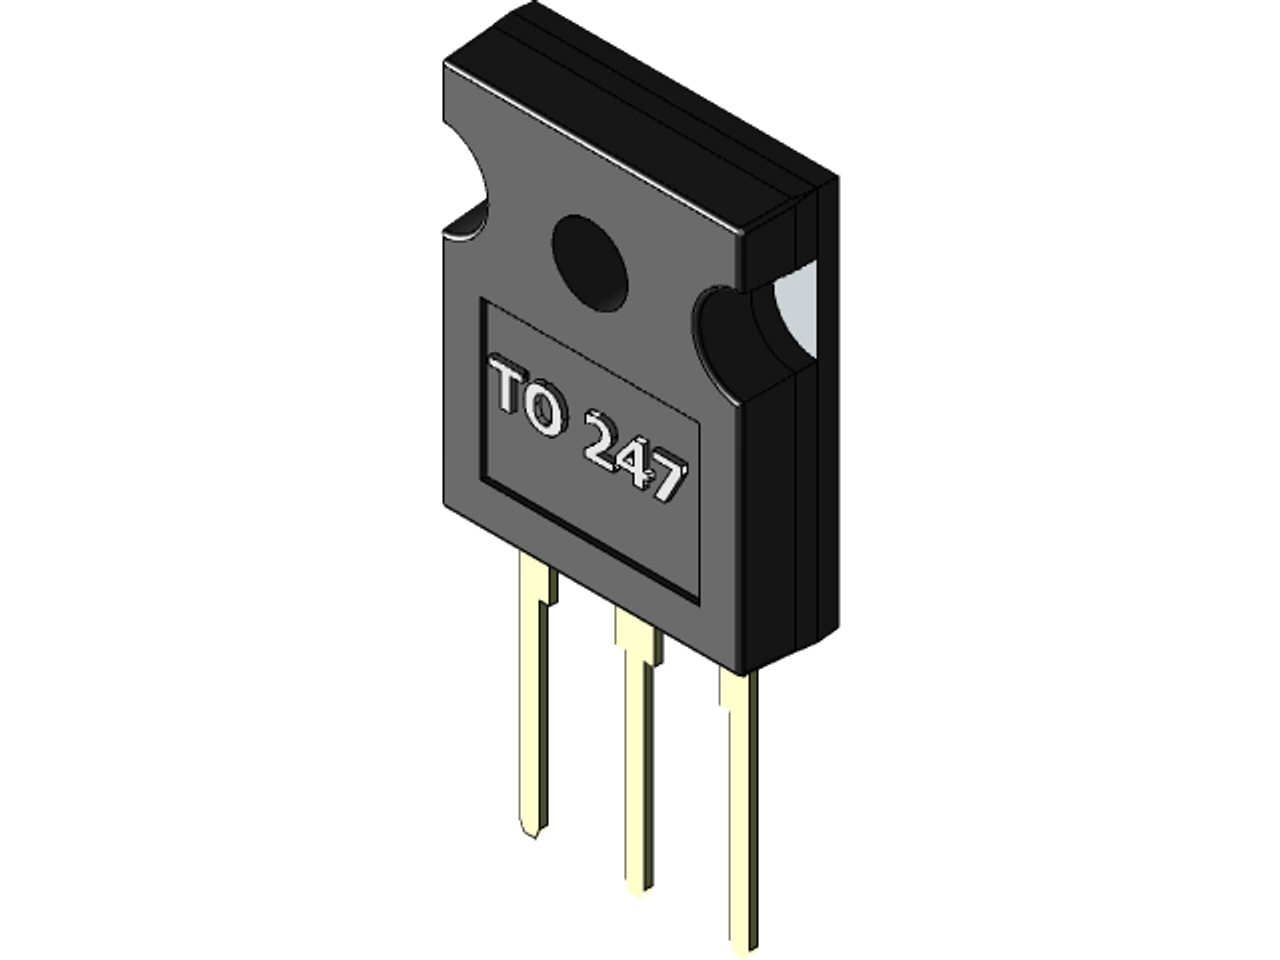 IRFP260MP ; Transistor N-MOSFET 200V 35A 300W, TO-247